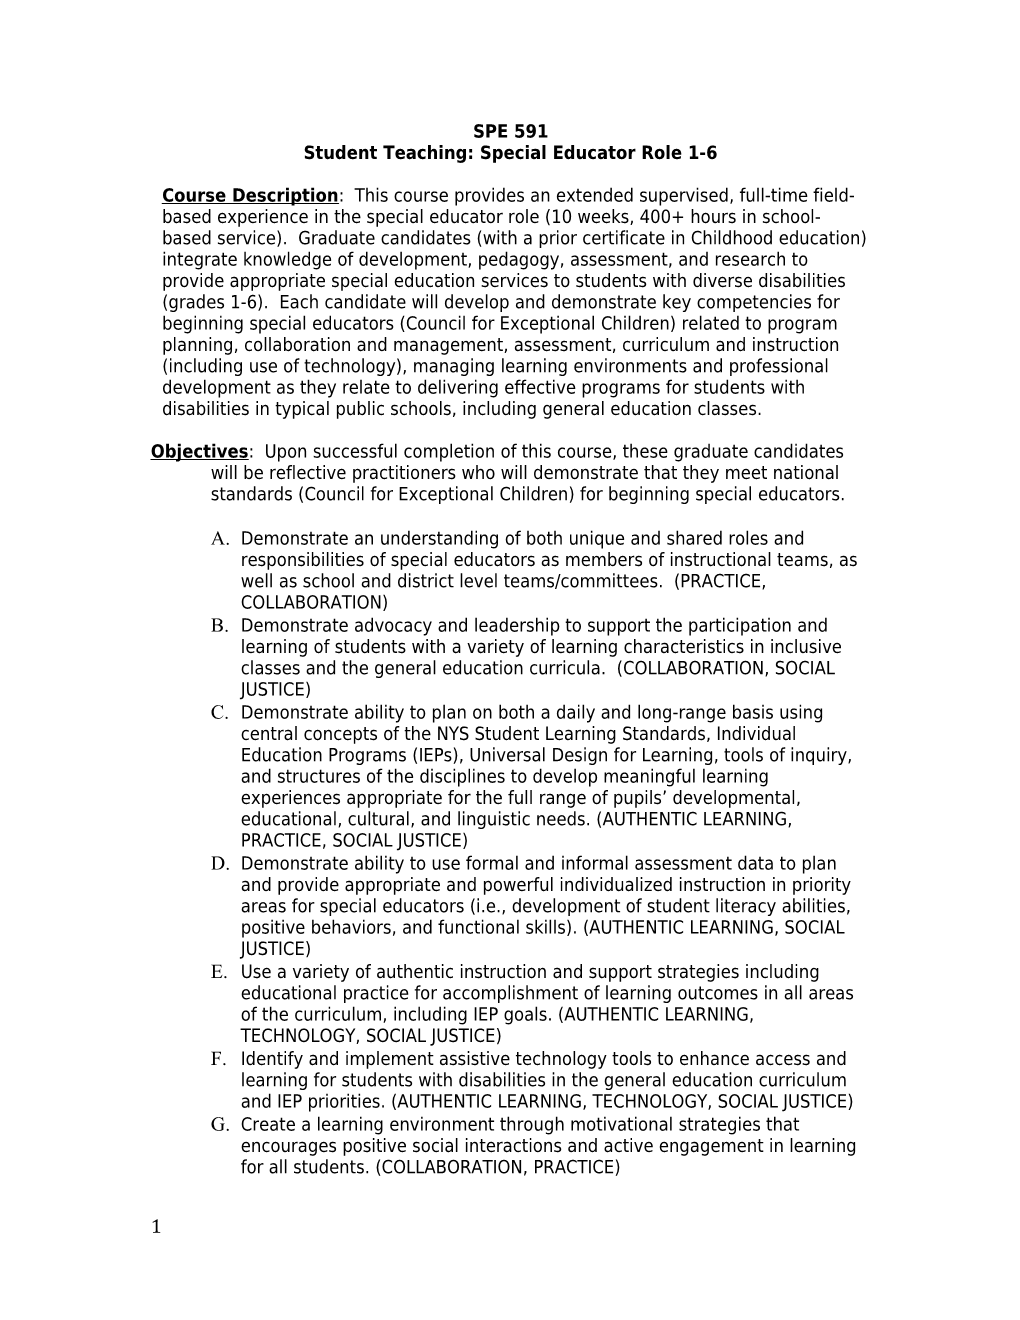 Student Teaching: Special Educator Role 1-6